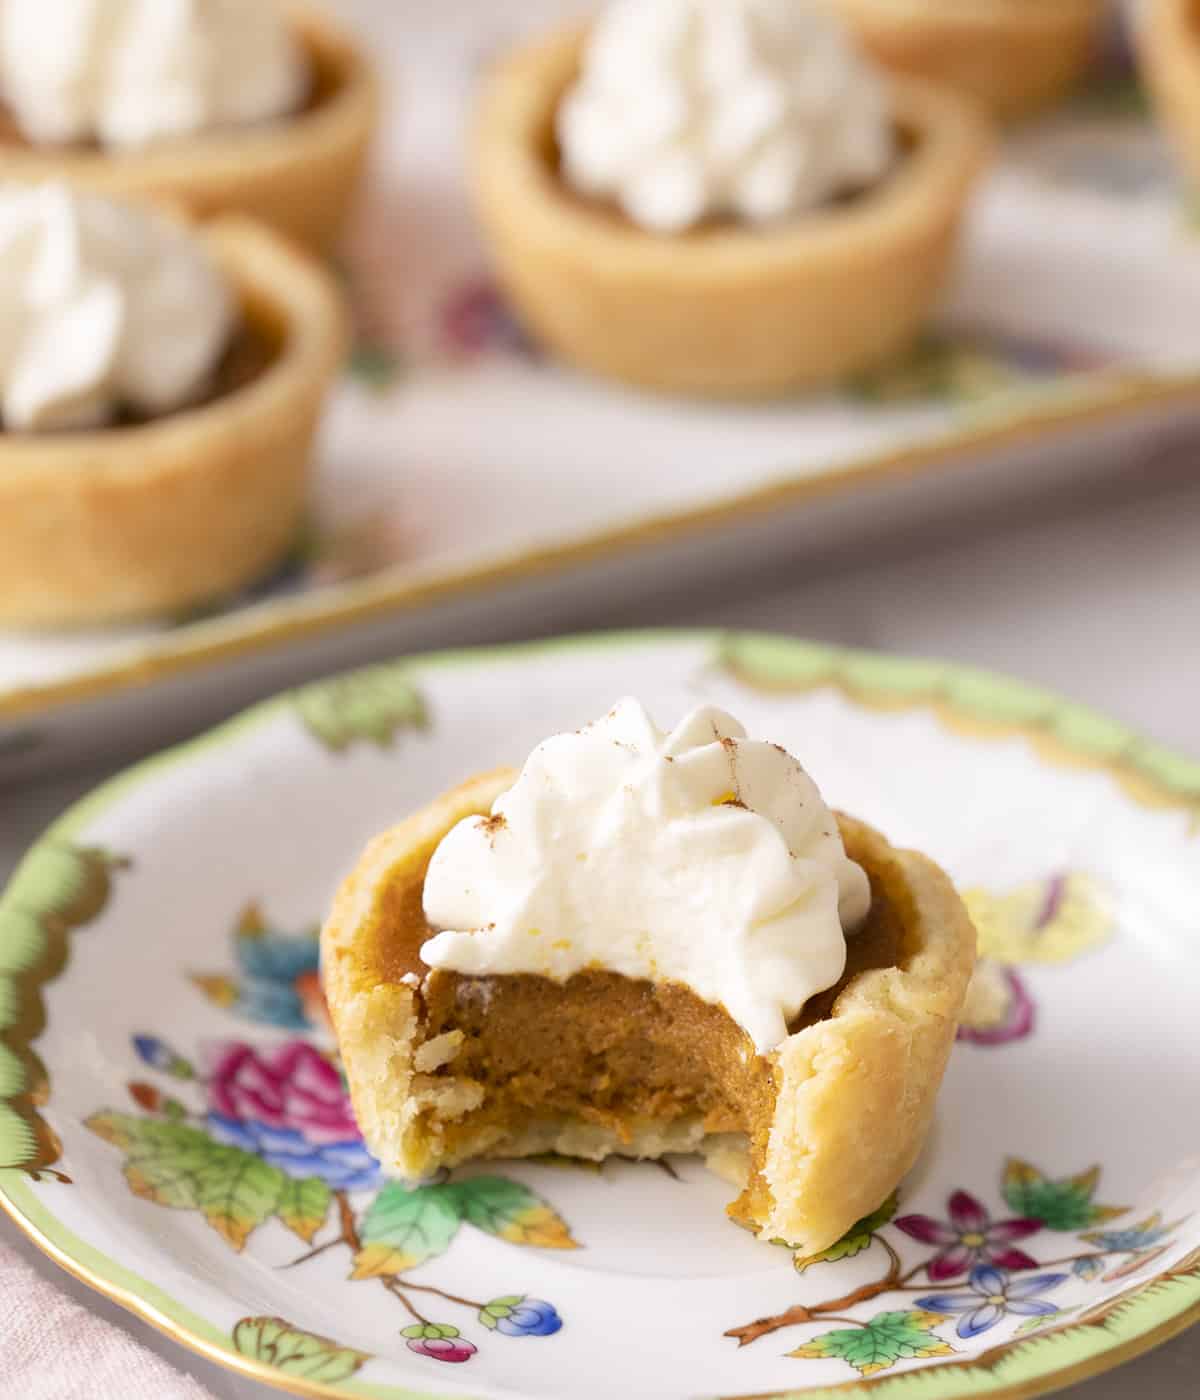 A mini pumpkin pie on a plate with a bite taken out.